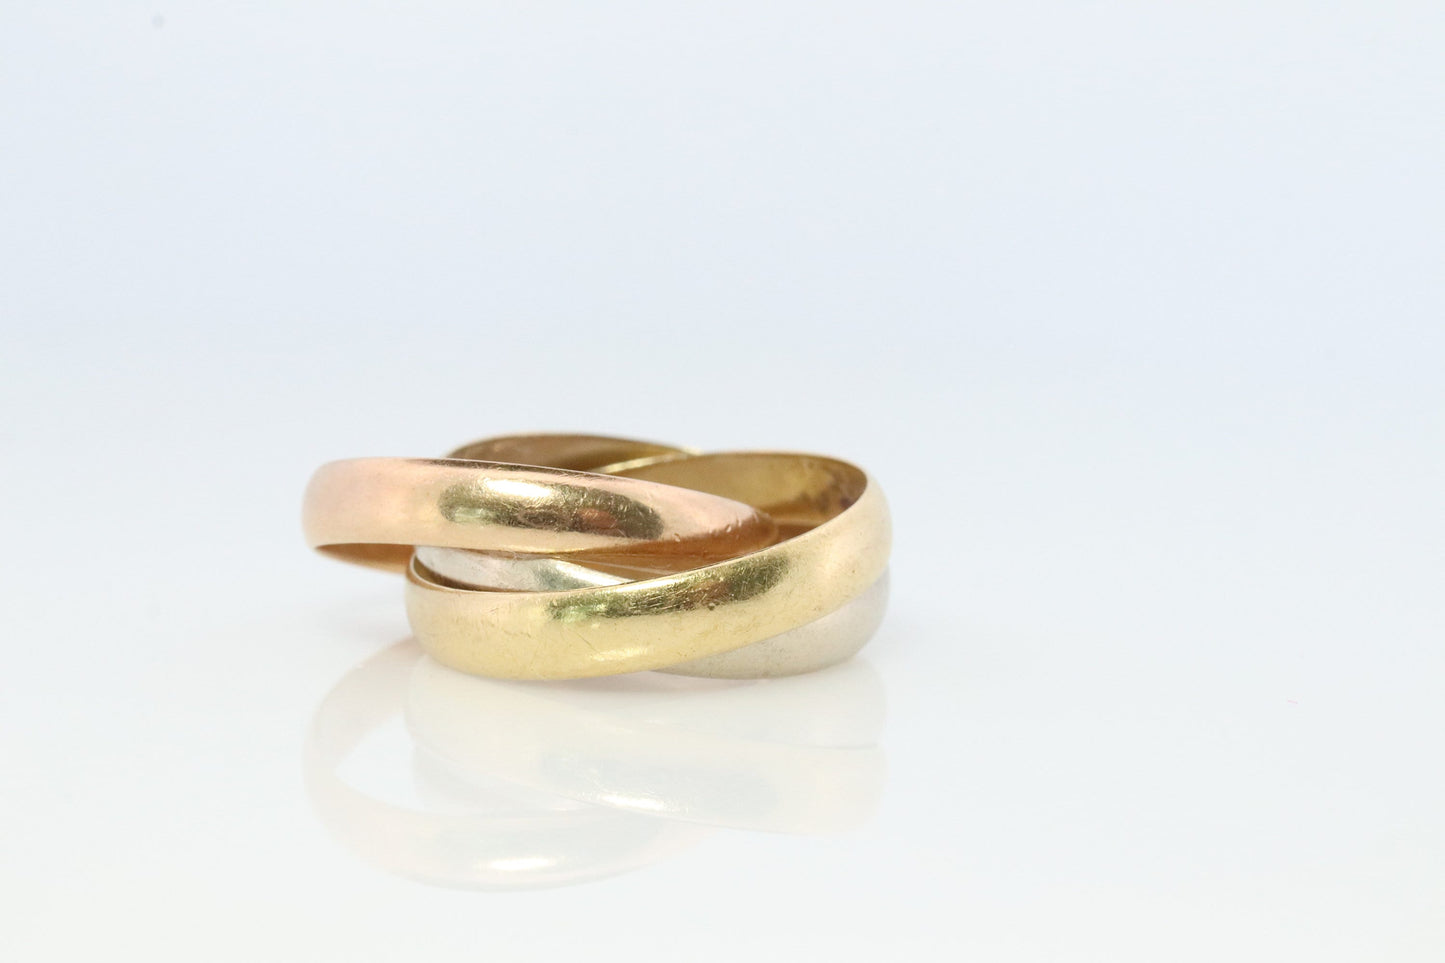 Vintage 18k 750 Rolling Ring. Trinity Tricolor Rolling Wedding Band. 18k 750 White Yellow Rose Gold Ring. Size 5.75